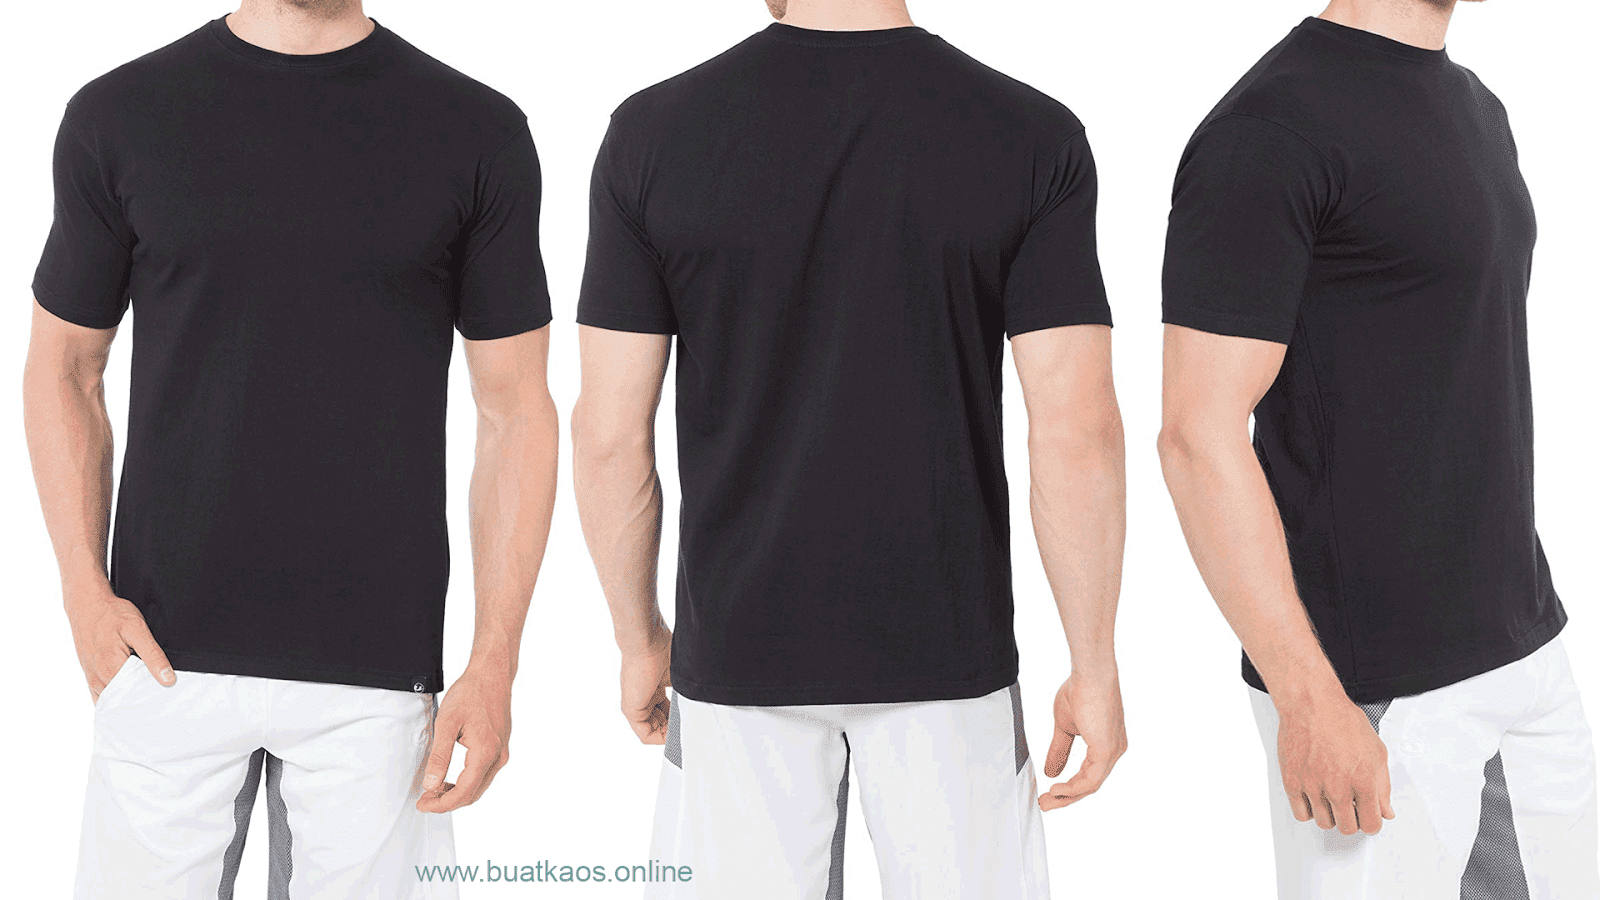 Download Free 4920+ Mockup Kaos Polos Hitam Depan Belakang Yellowimages Mockups these mockups if you need to present your logo and other branding projects.